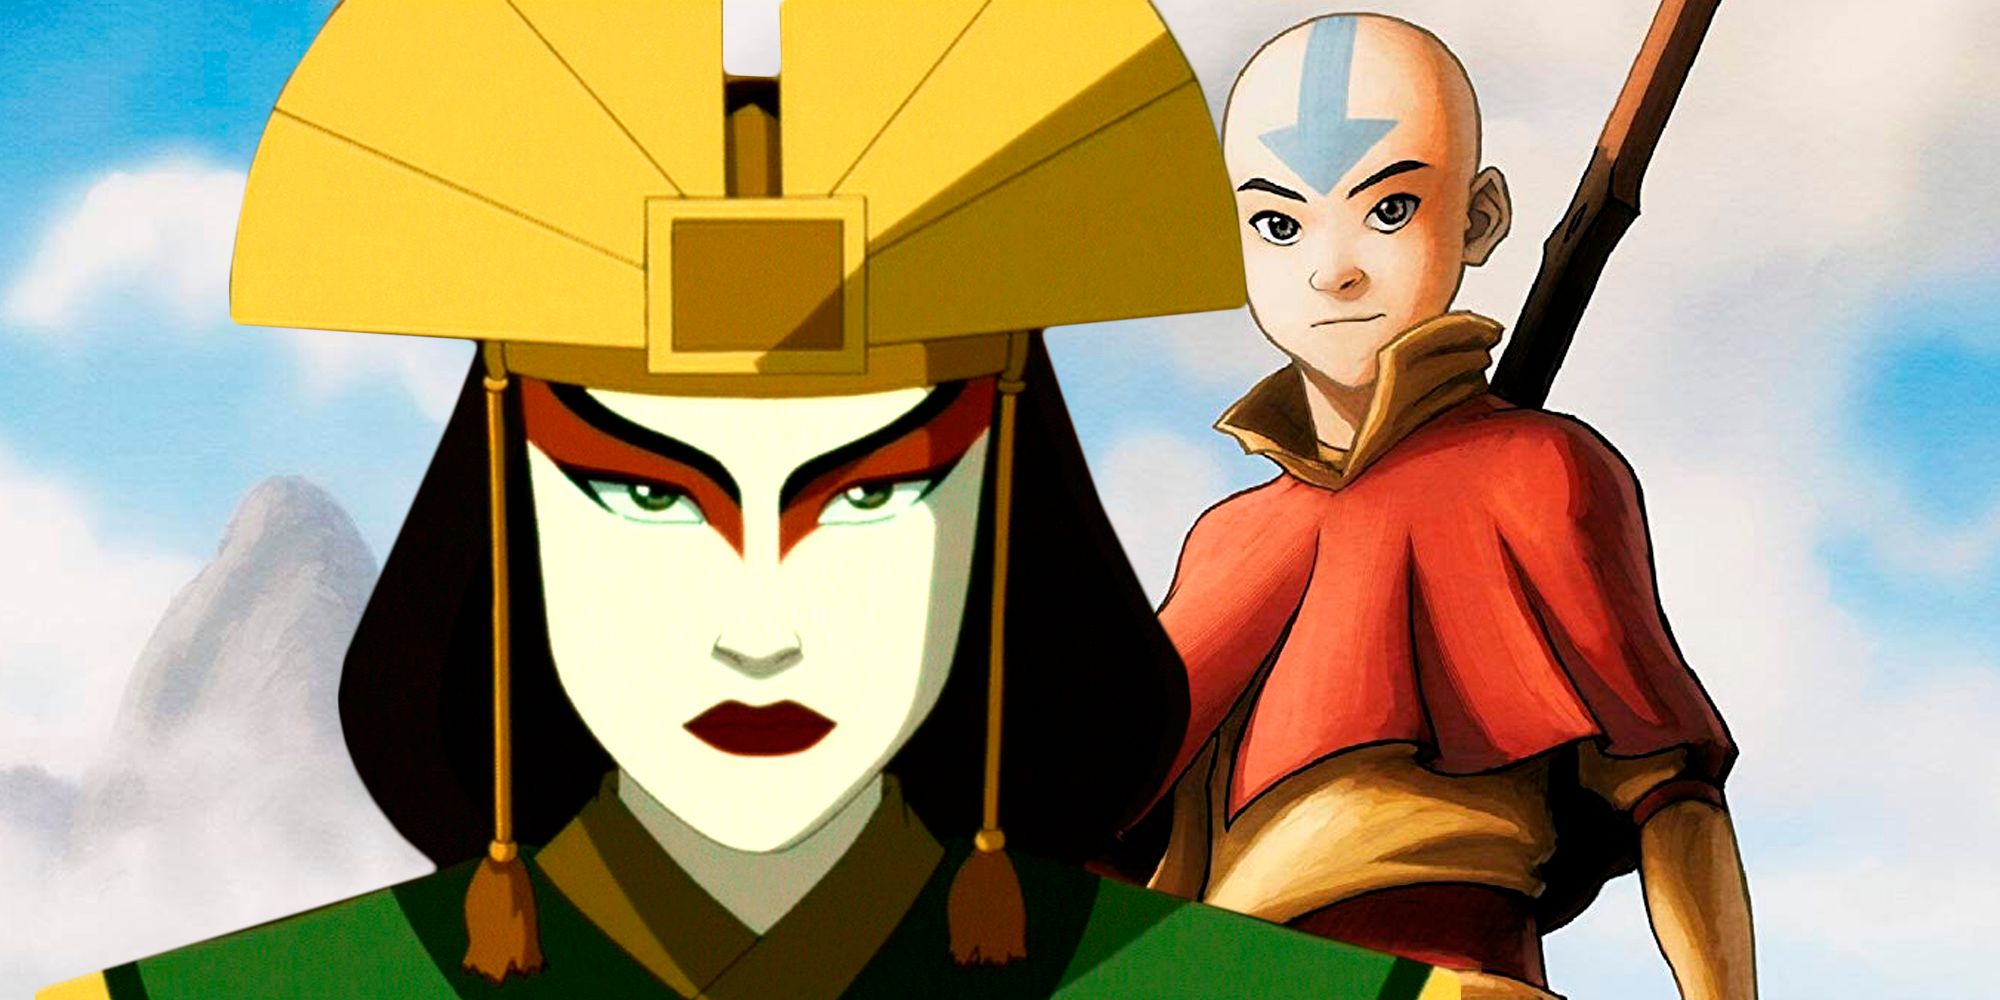 Aang is not the Oldest Avatar in Avatar The Last Airbender